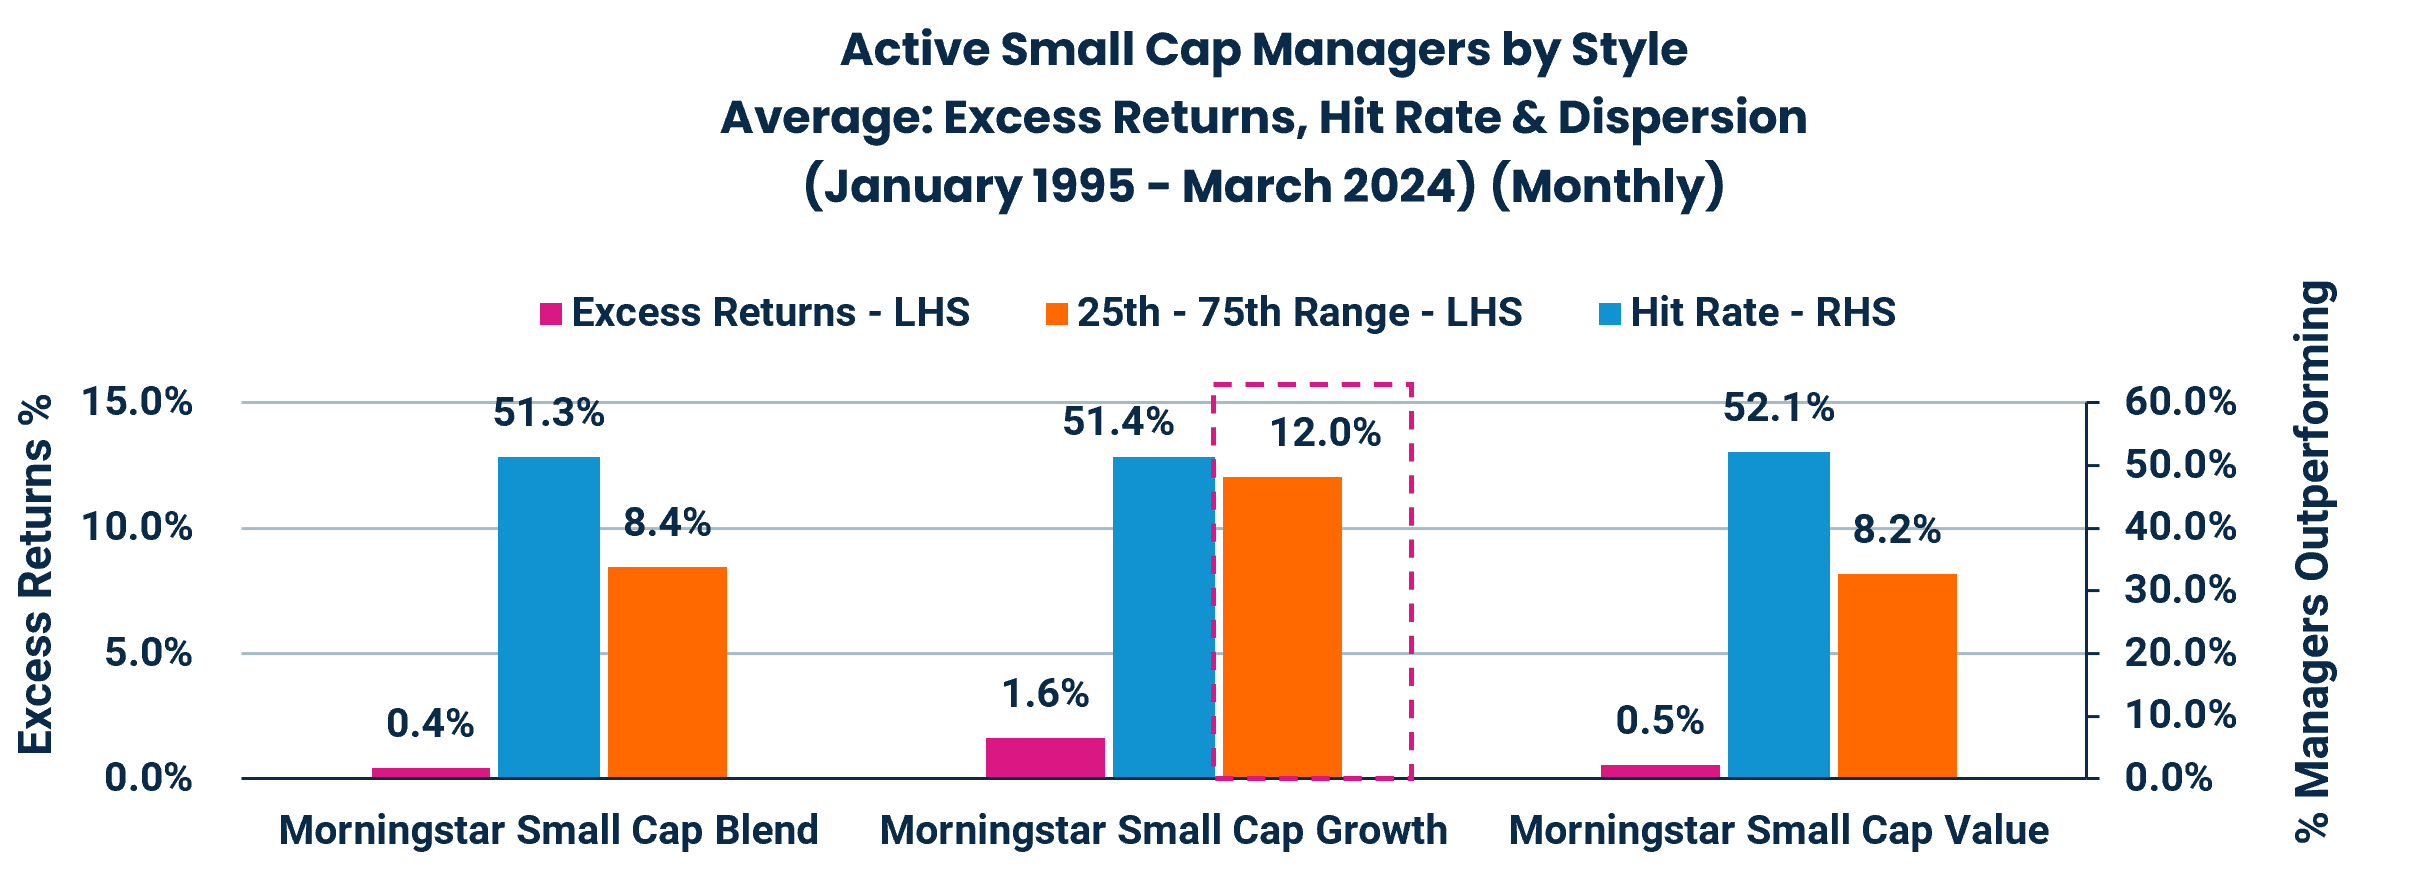 Active Small Cap Managers by Style Average: Excess Returns, Hit Rate & Dispersion
(January 1995 - March 2024) (Monthly)